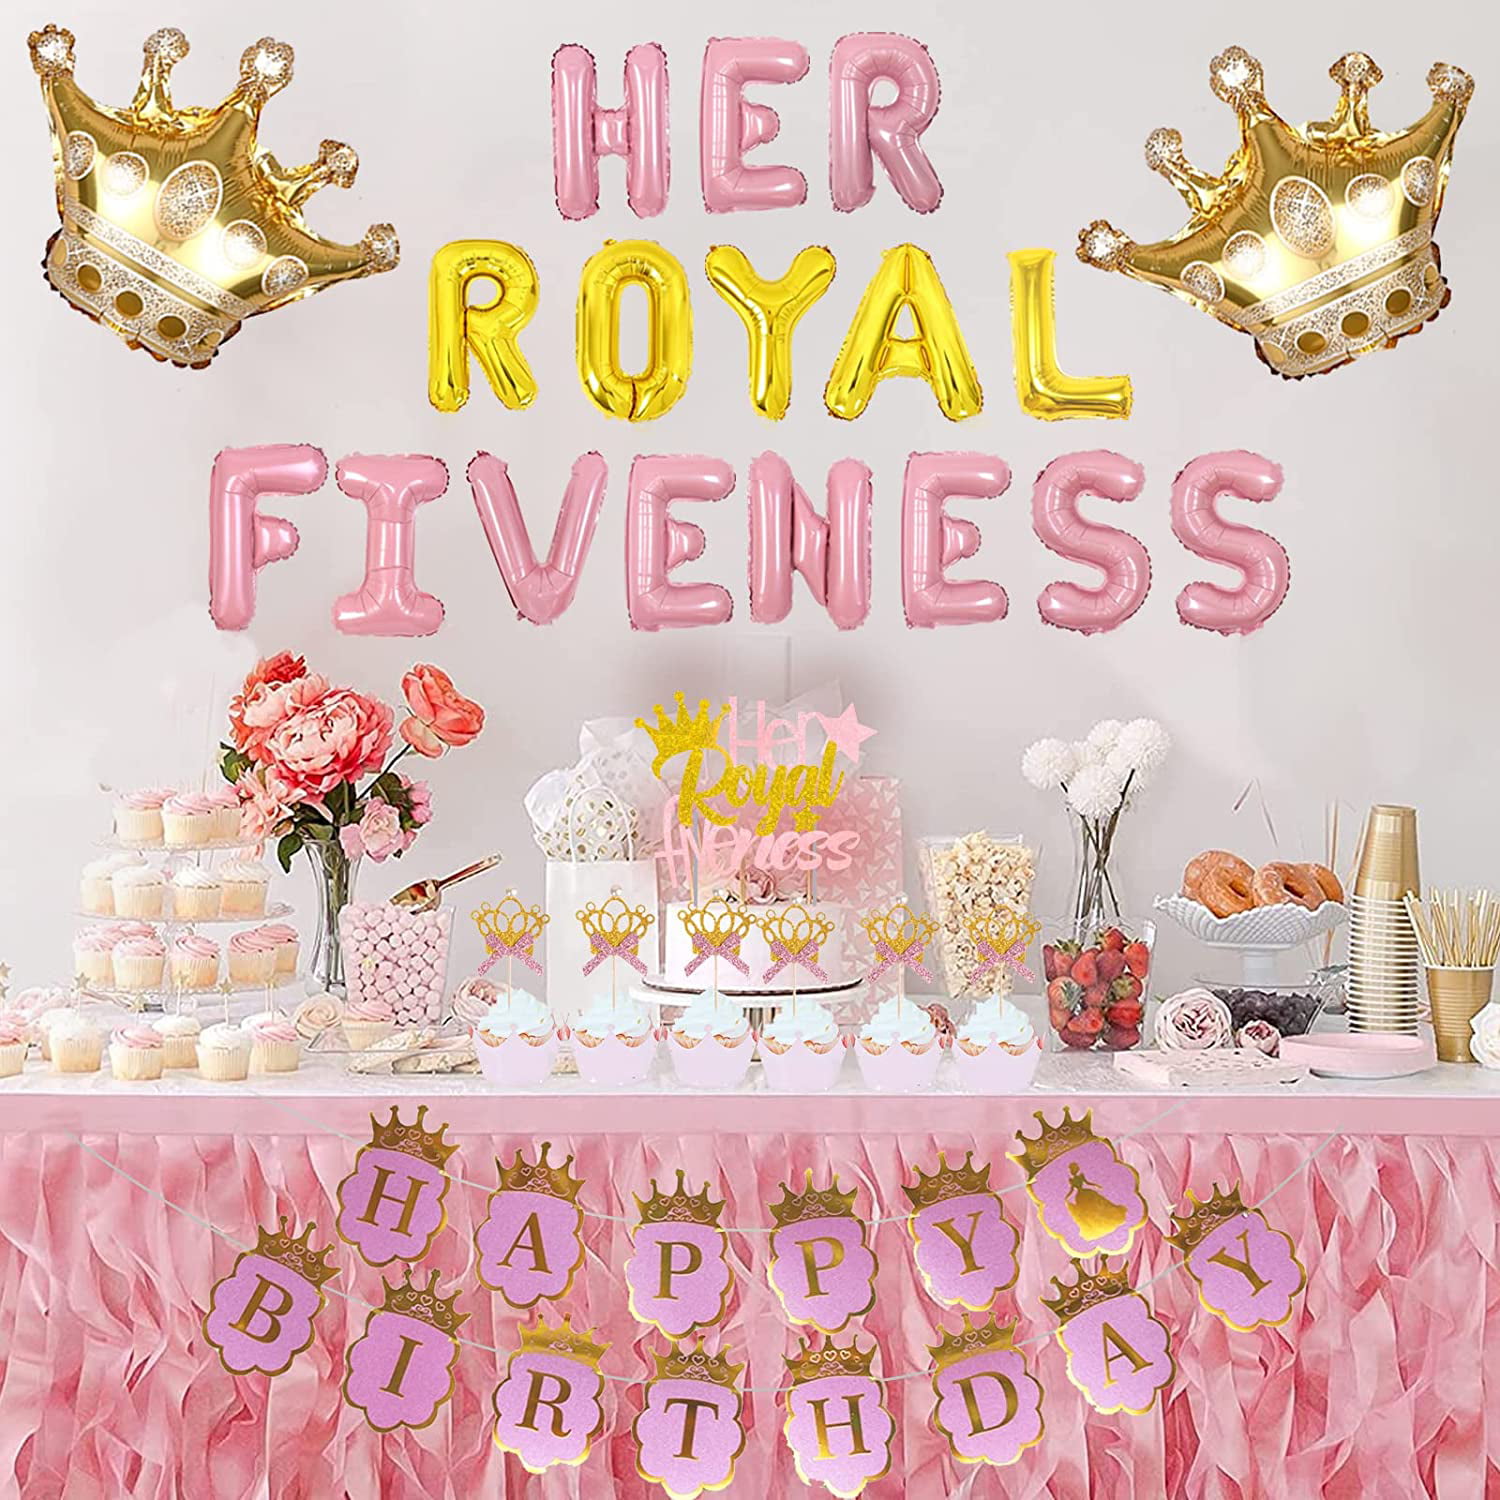 Her Royal Fiveness Birthday Decorations, 5th Birthday Decorations Girl,  Princess Theme Birthday Part…See more Her Royal Fiveness Birthday  Decorations